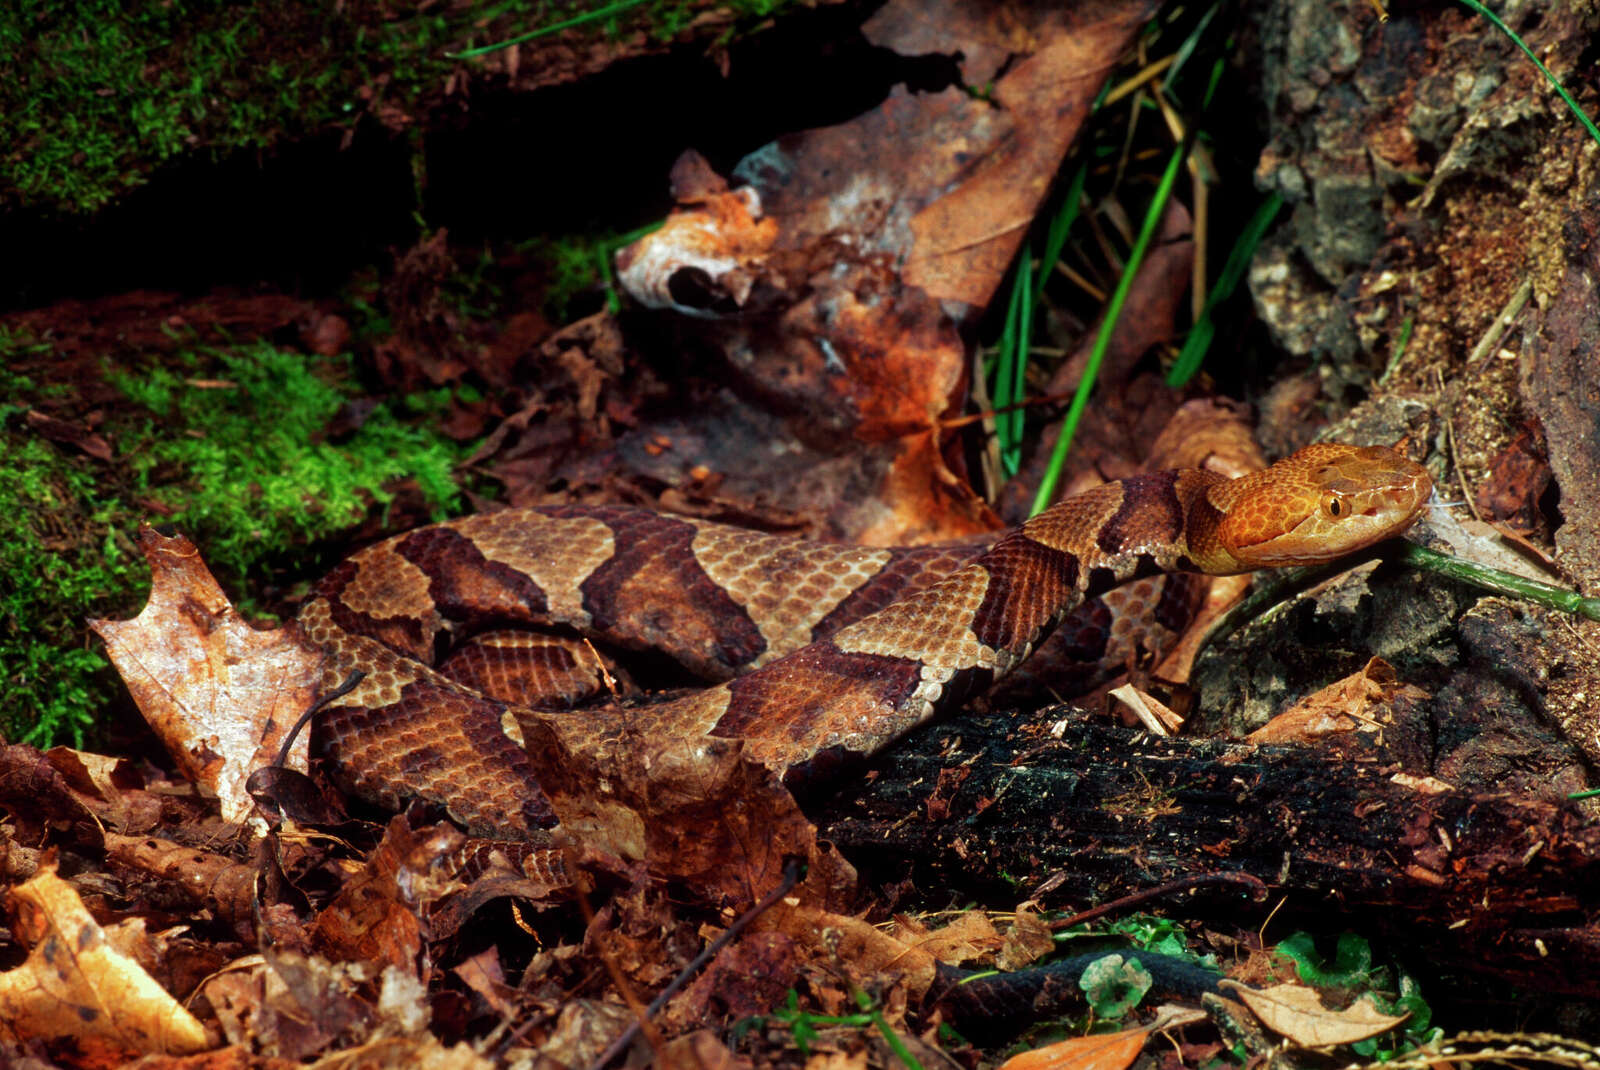 An image of a copperhead snake.